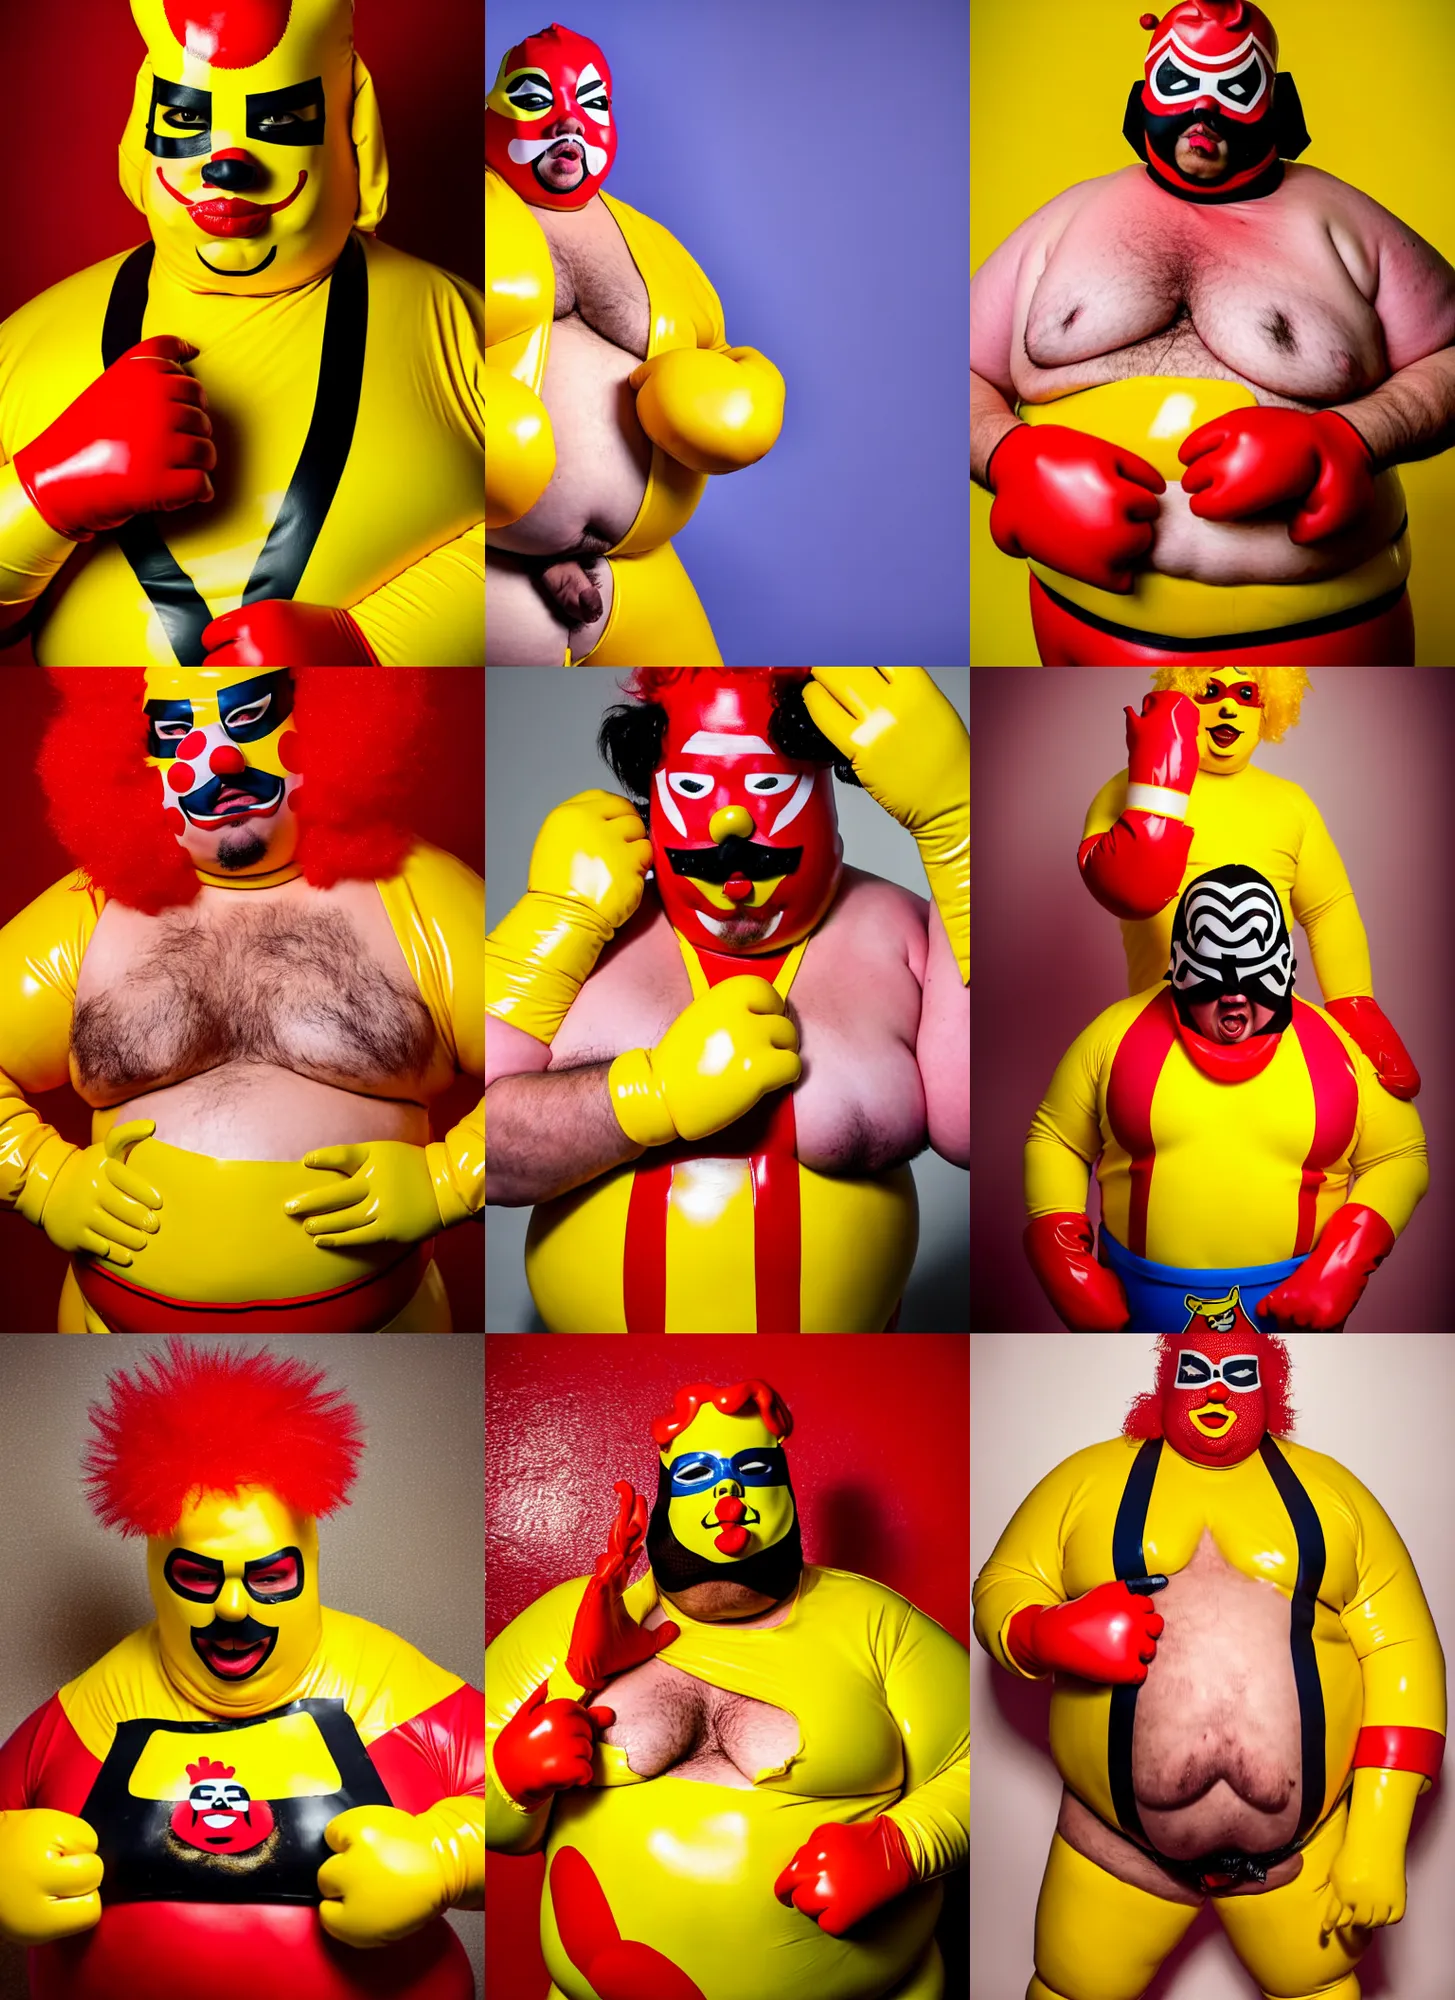 Prompt: wide angle lens portrait of a very chubby looking Lucha libre dressed in yellow and red rubber latex costume holding a huge sloppy hamburger, bare hairy chest, red Ronald McDonald hair, yellow latex gloves, red and white color latex sleeves, photography inspired by Oleg Vdovenko